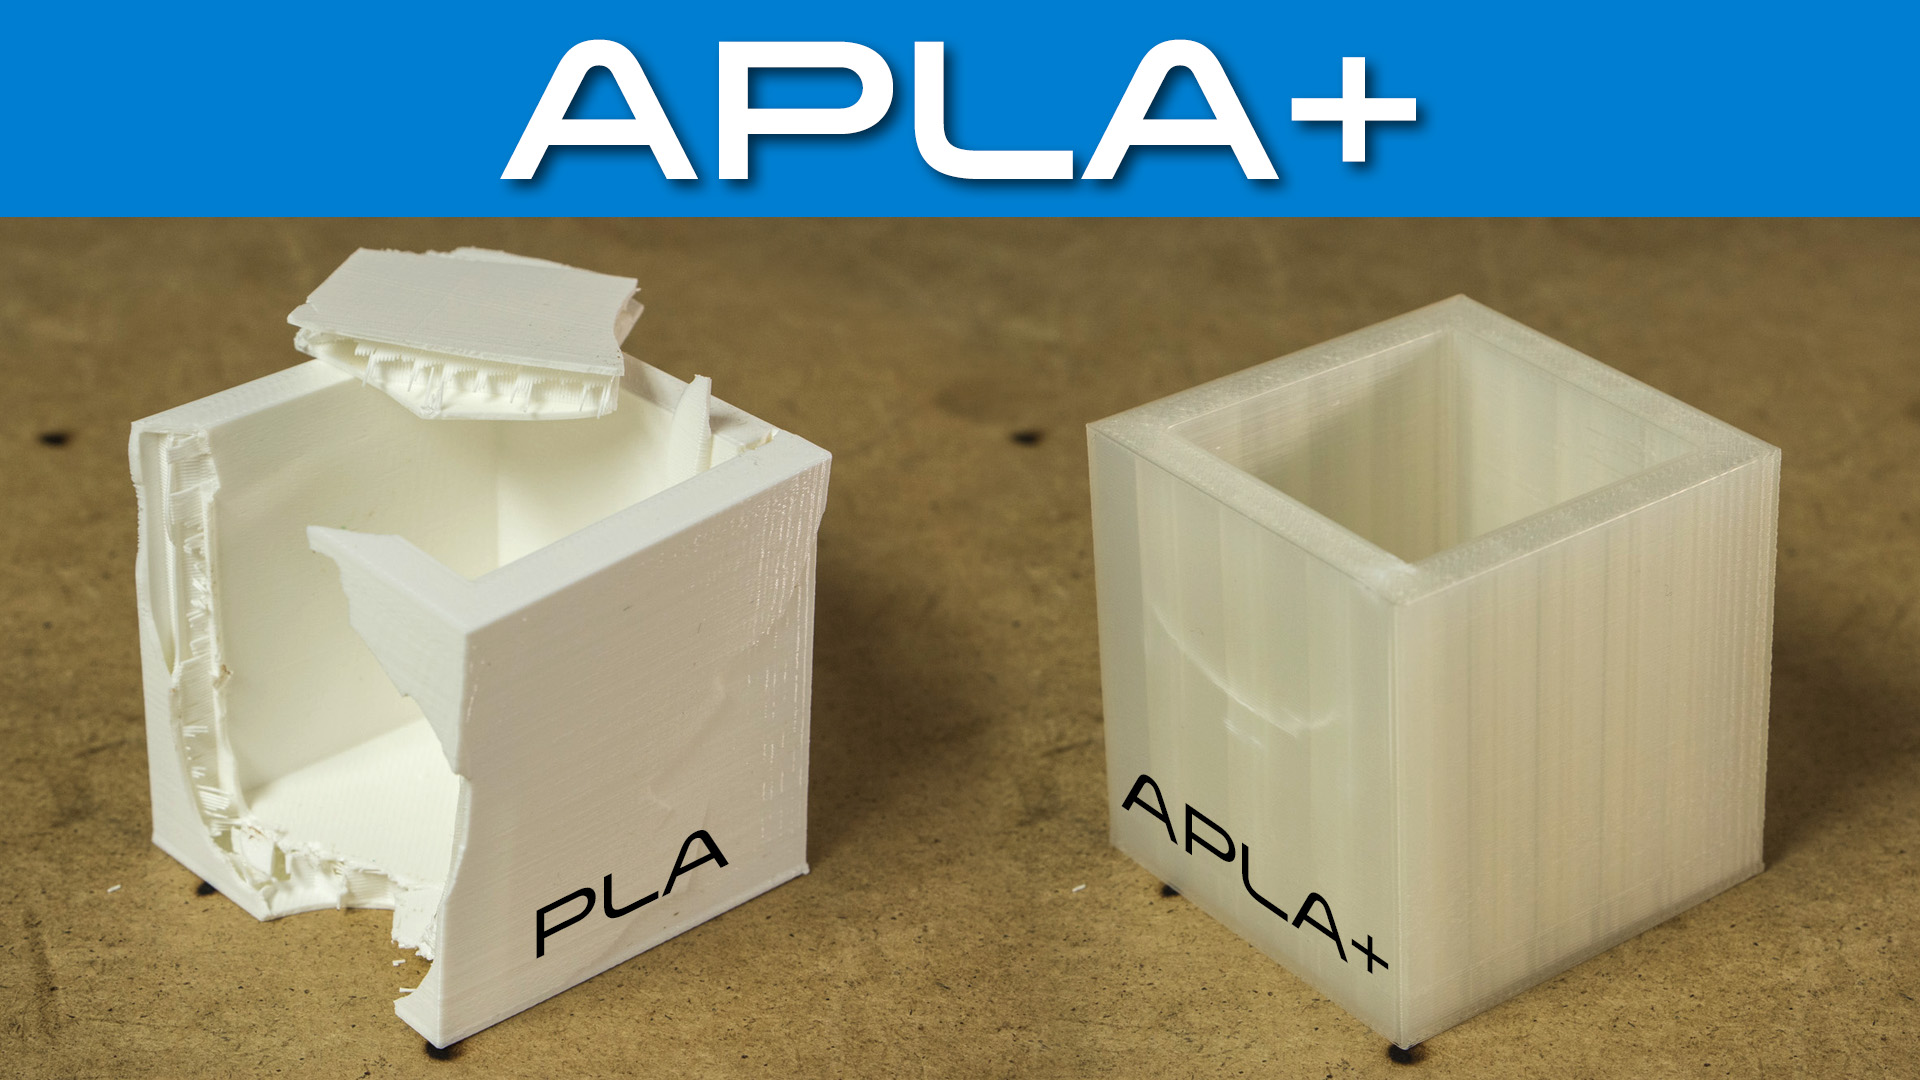 APLA+ is substantially tougher than PLA